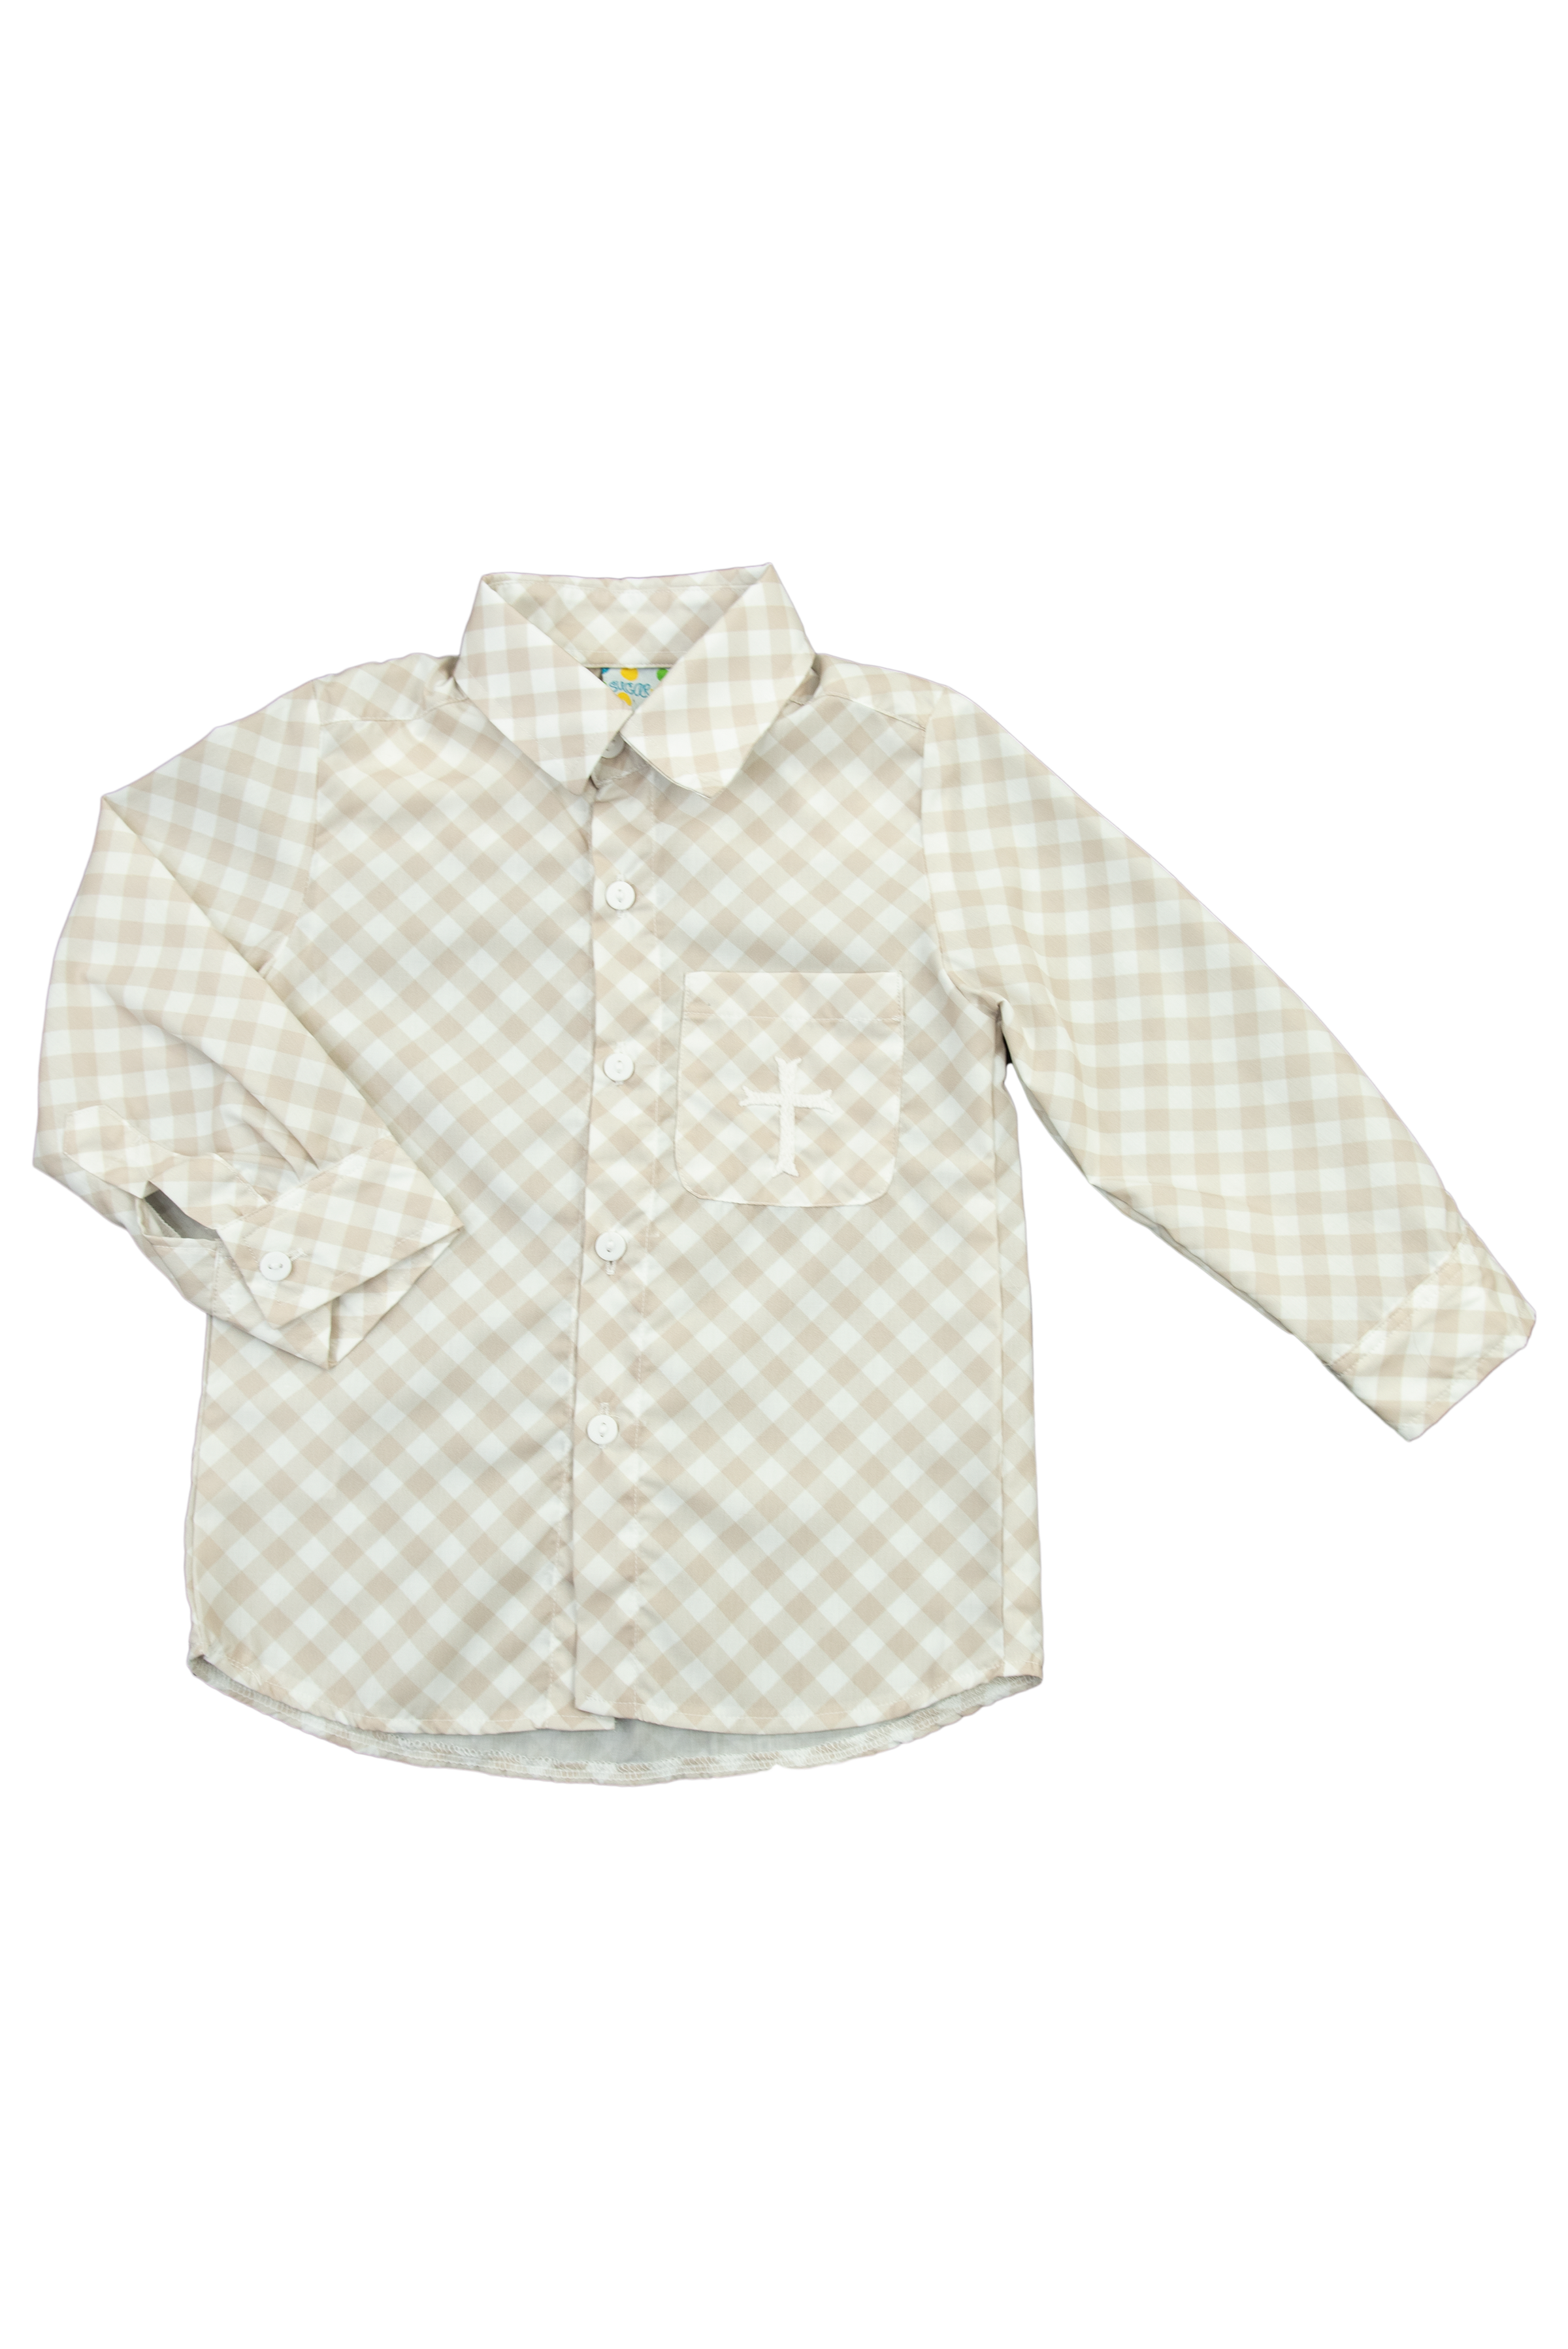 Boys Hand Embroidered Cross Shirt Only